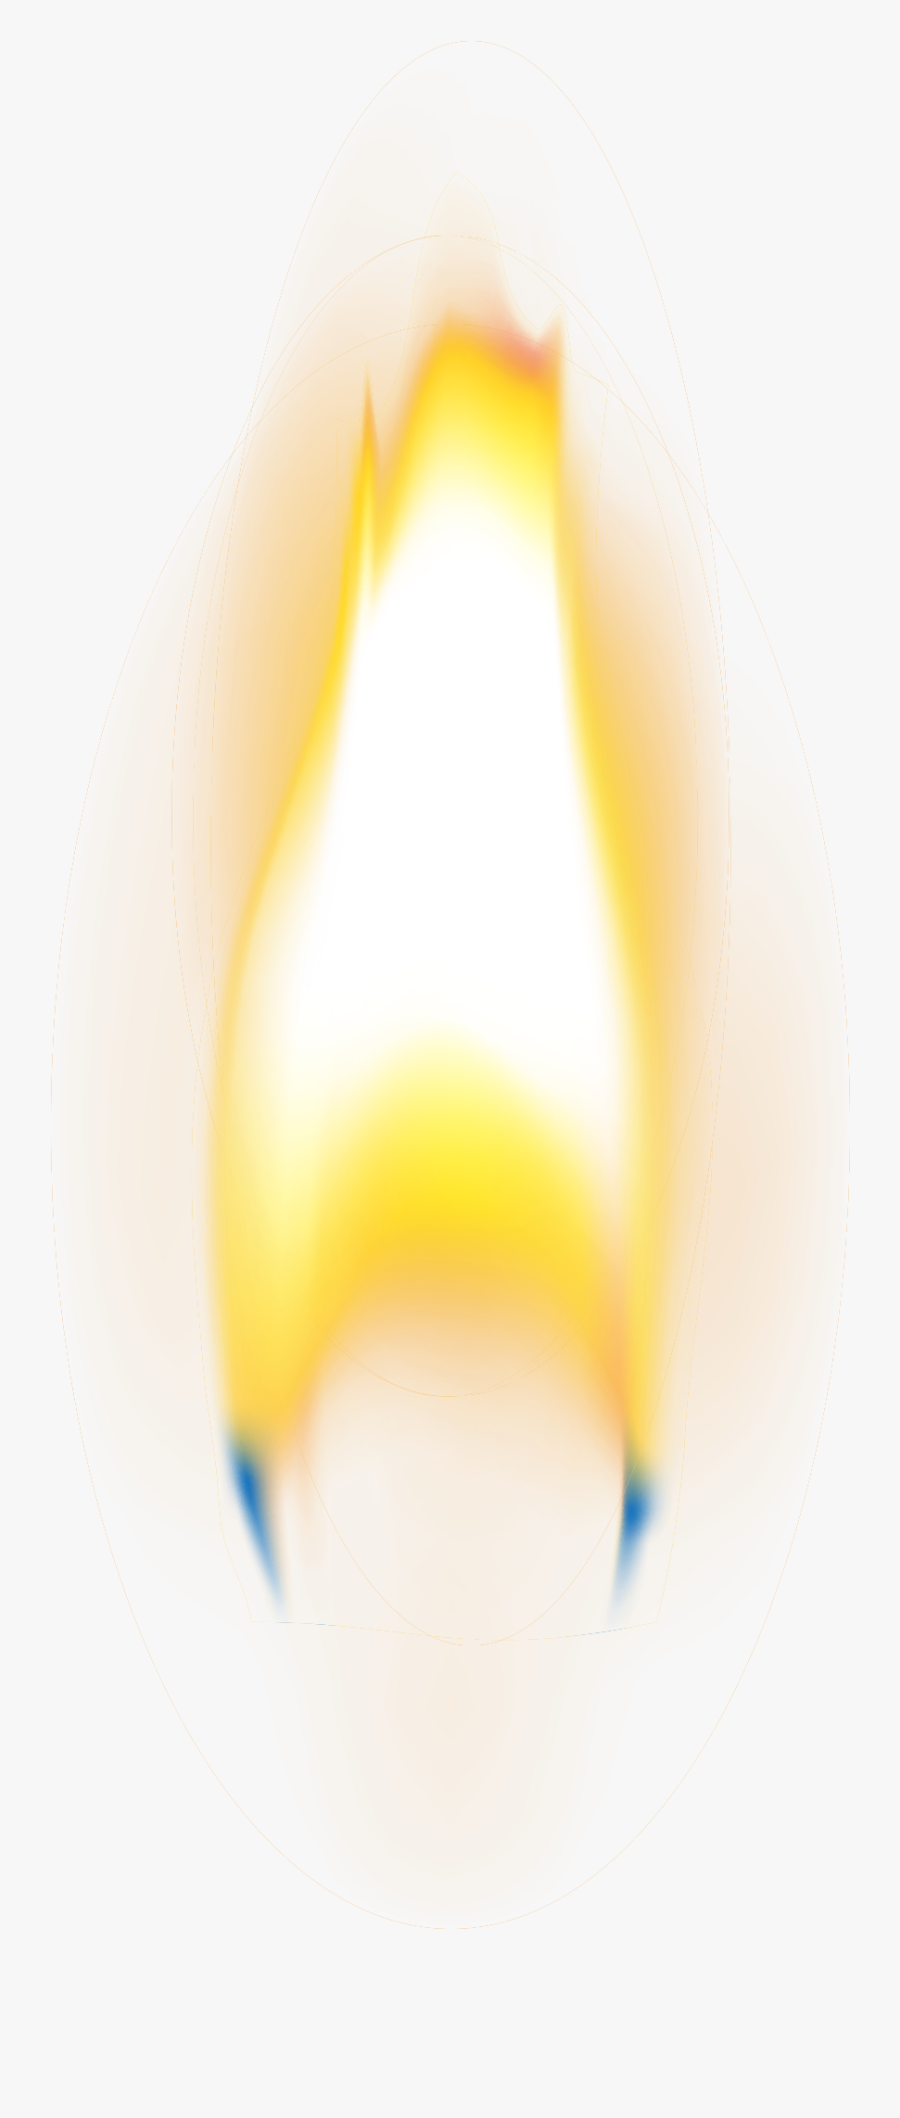 Candle Flame Png - Candle Flame Transparent Background , Free